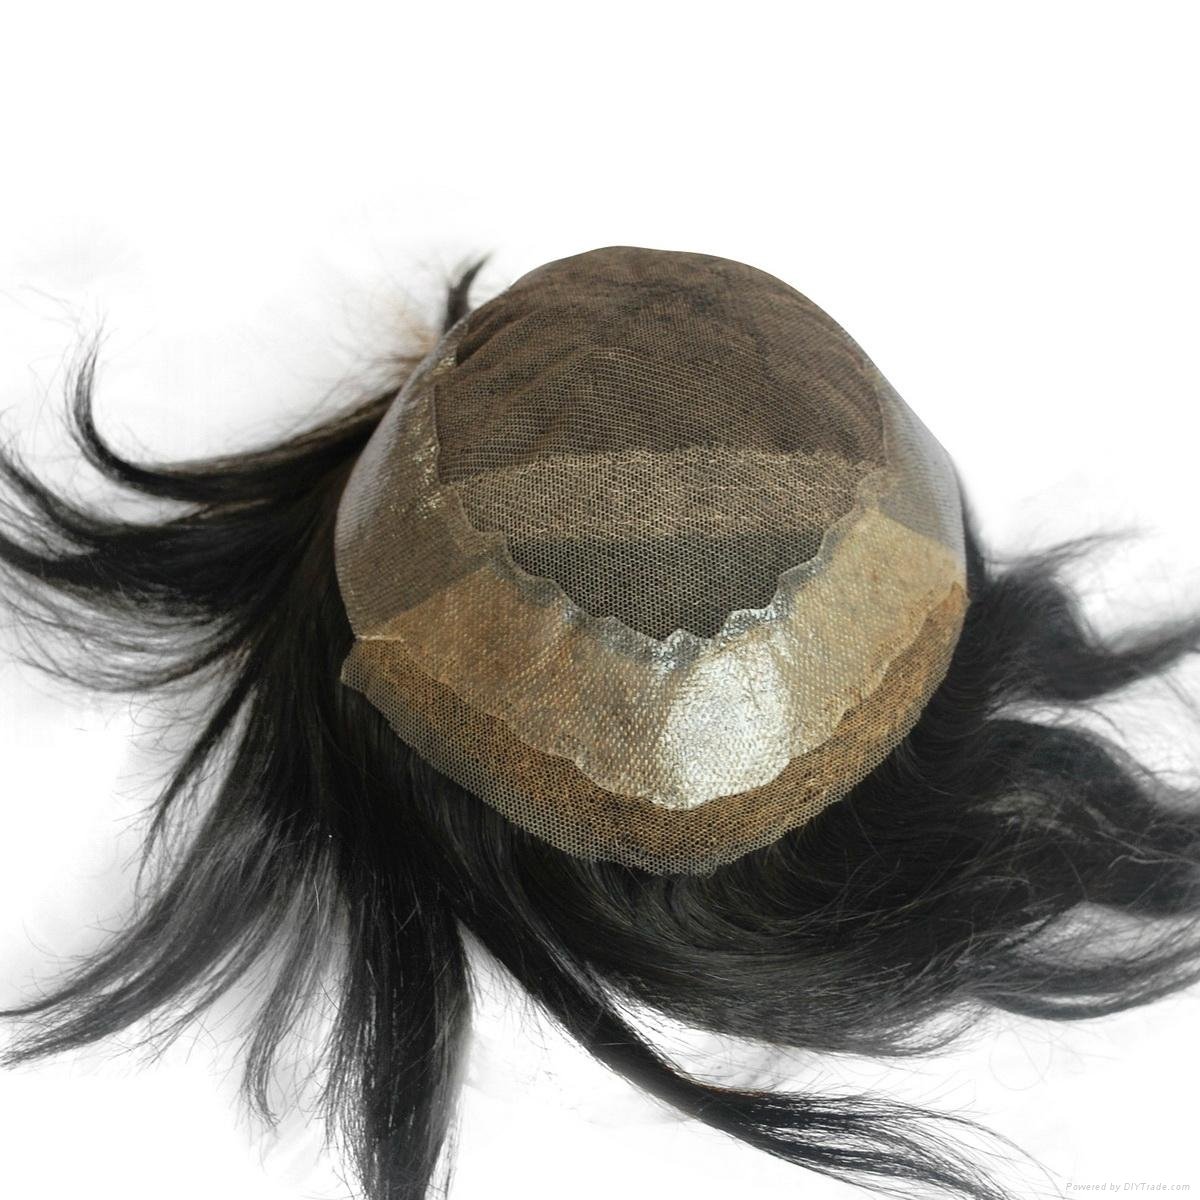 Hair wig for men in stock #1b human hair with pu around 2